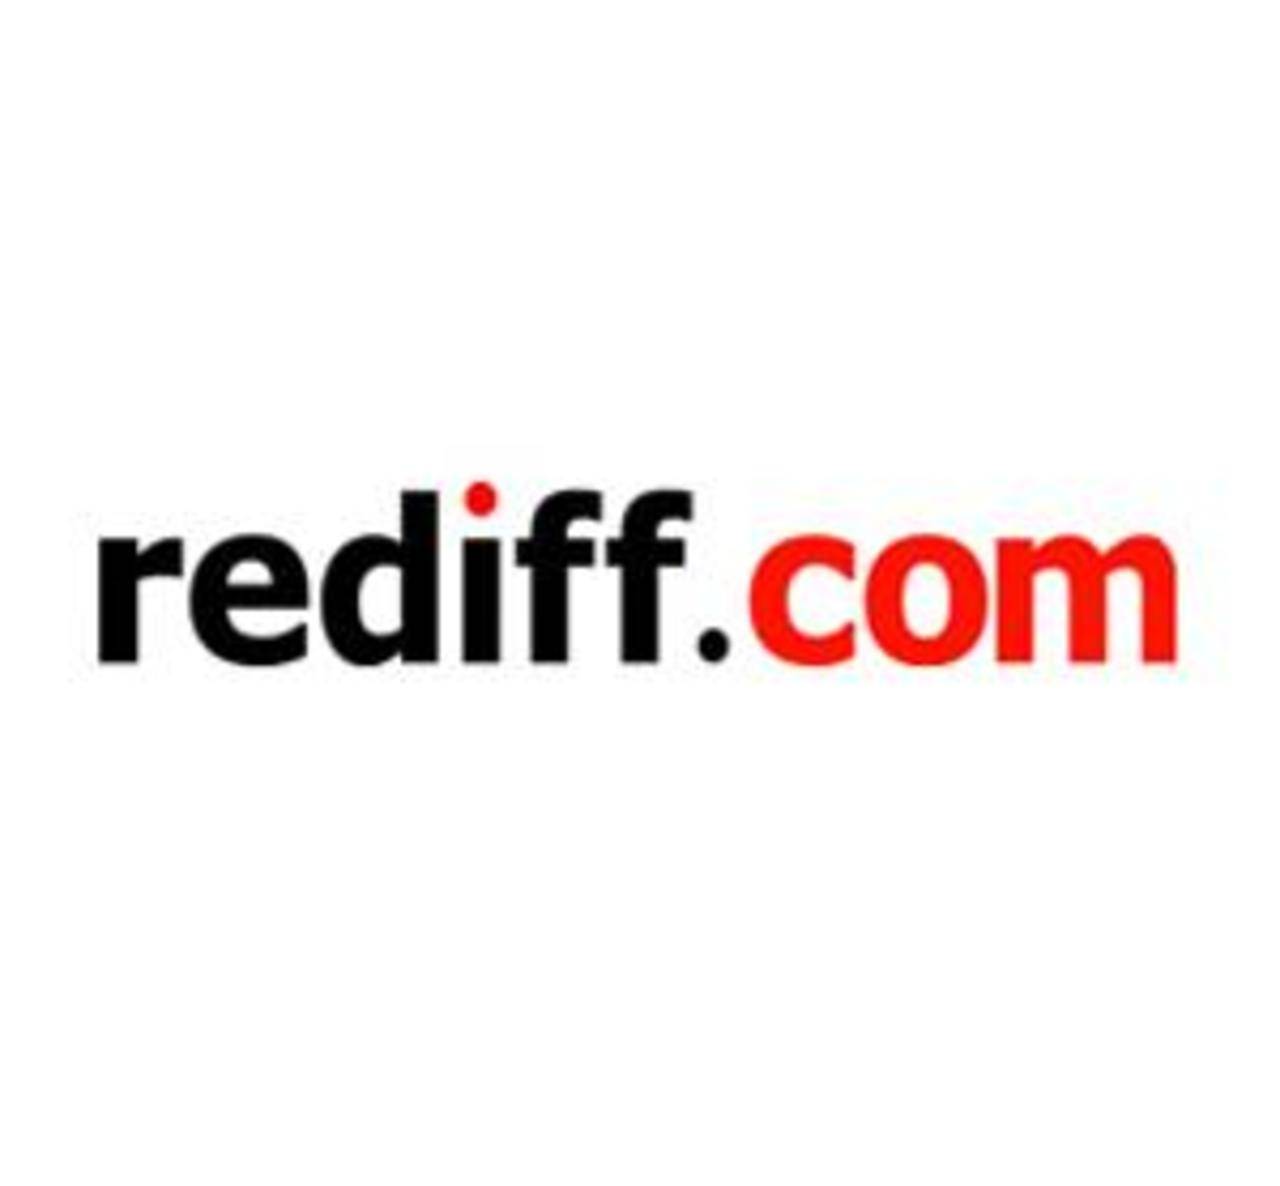 42 Rediff Coupons & Offers - Verified 18 minutes ago